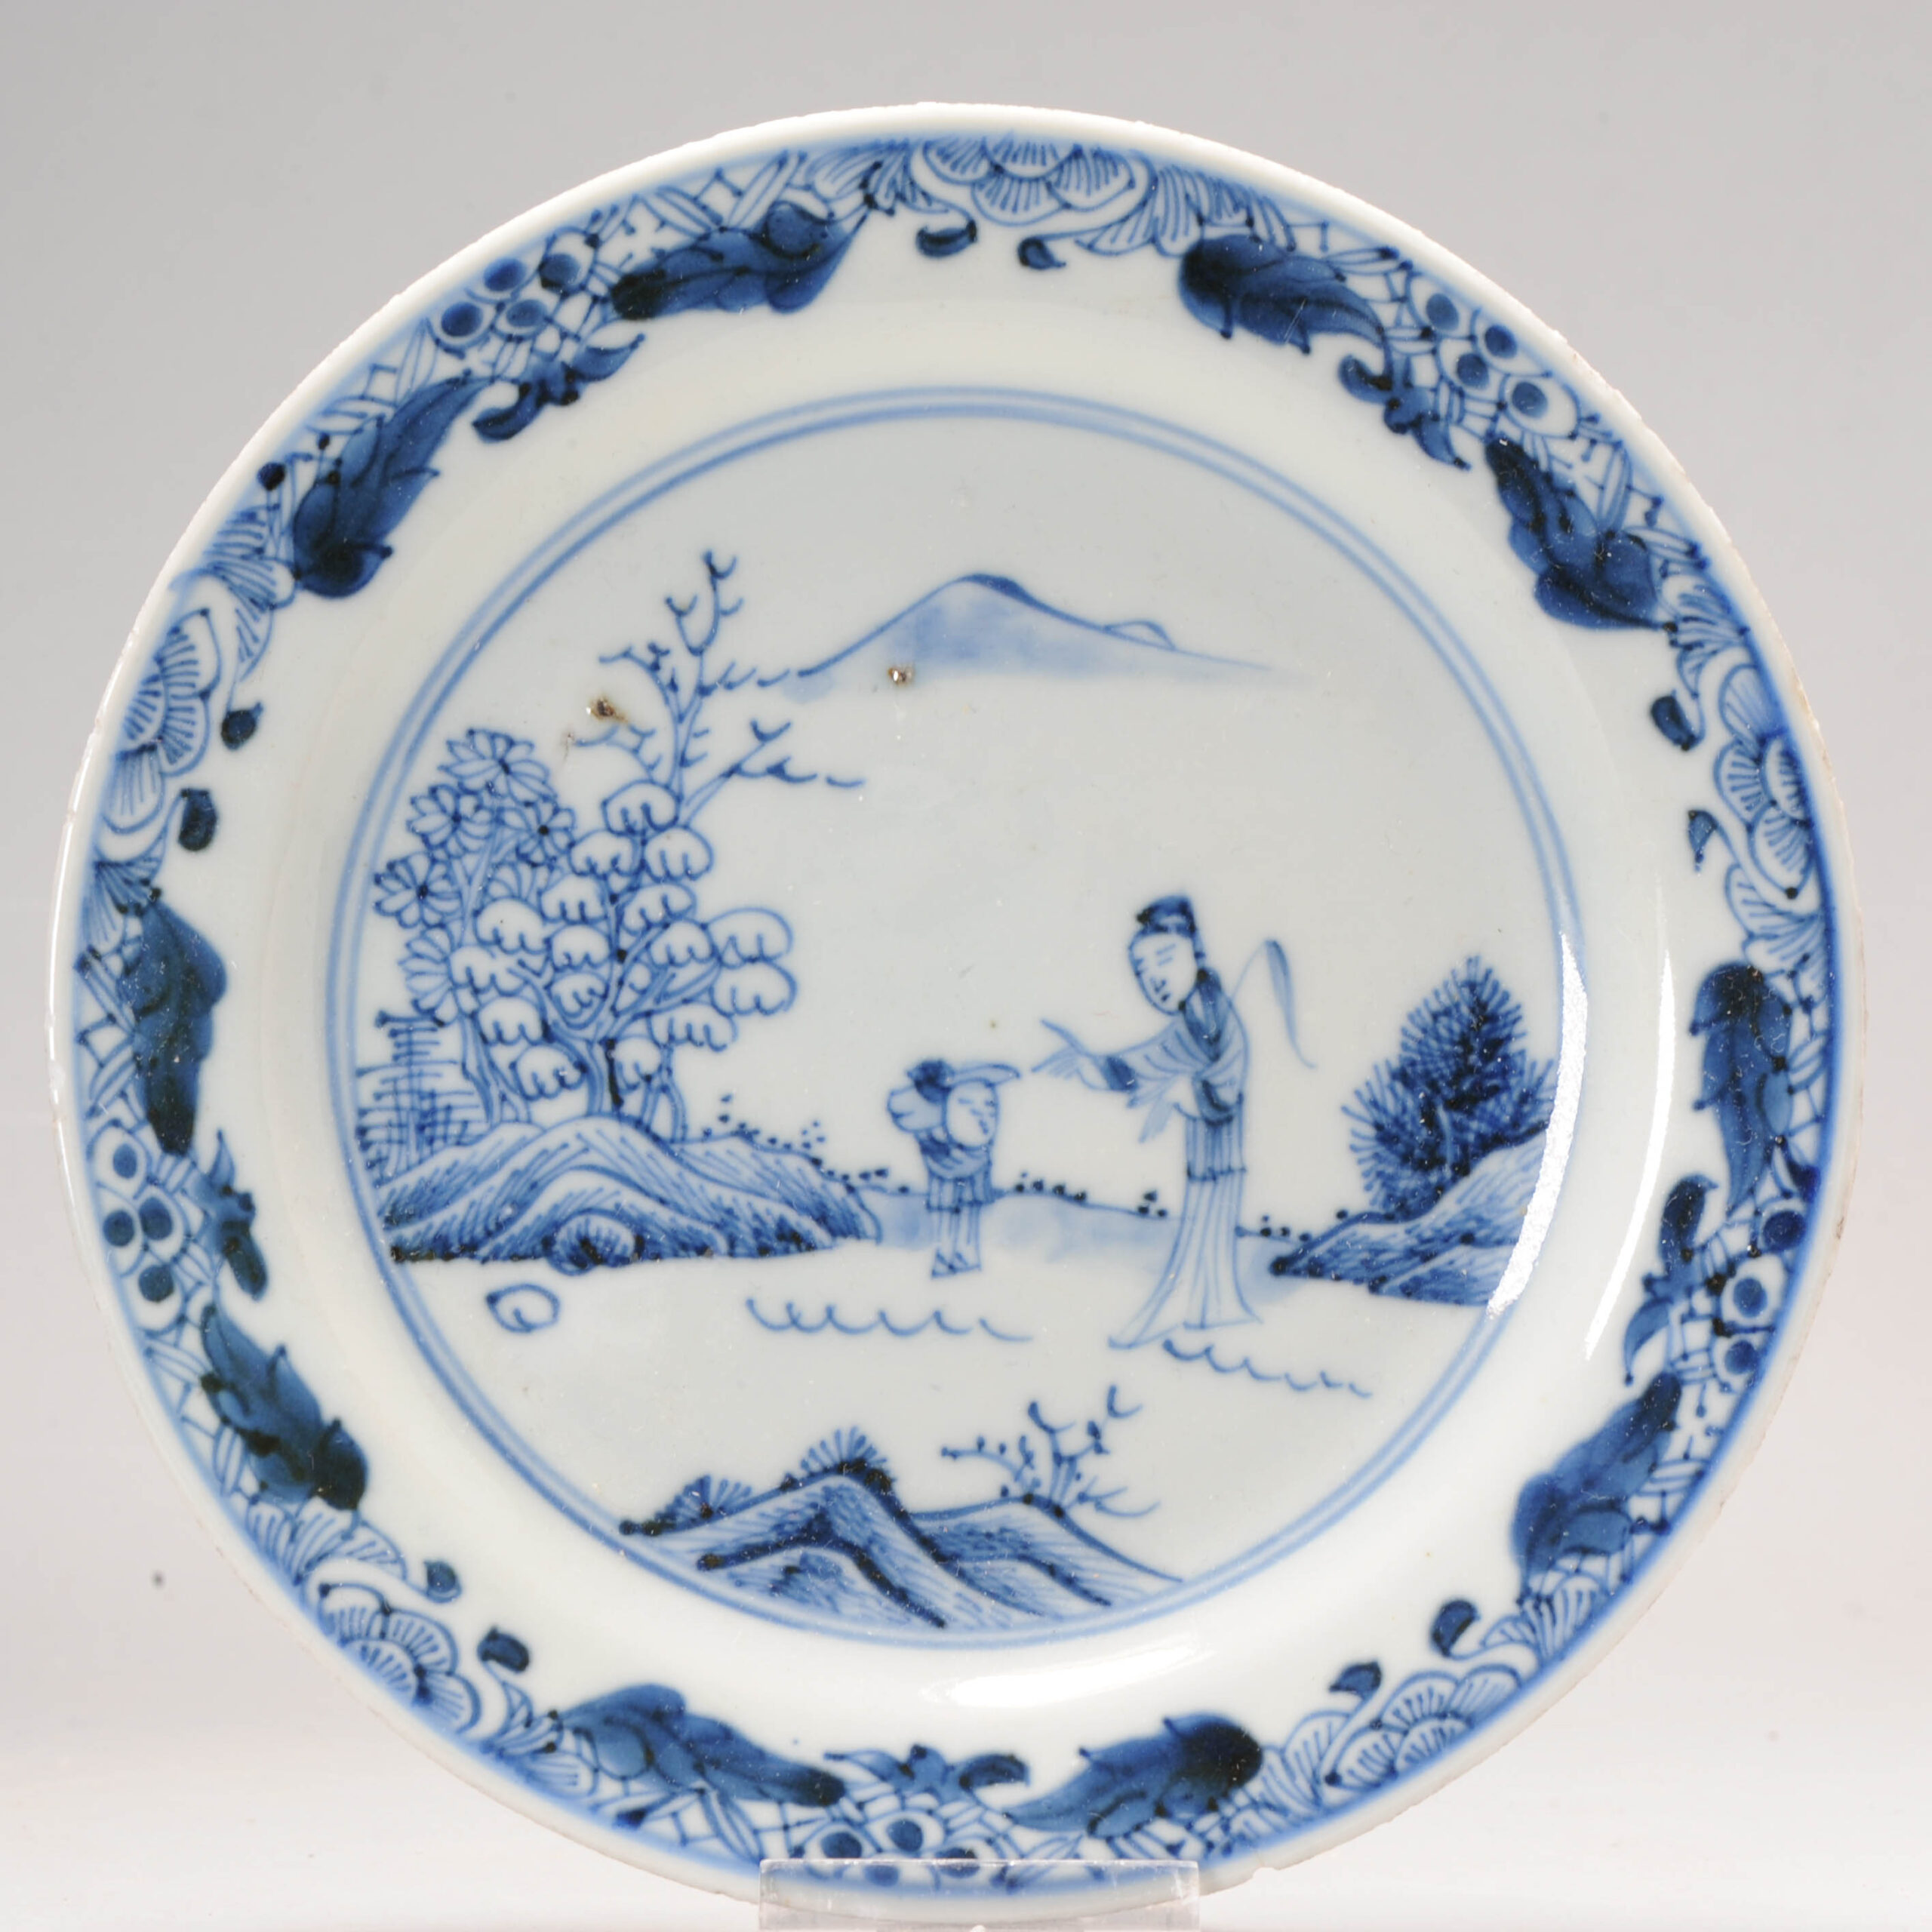 1101 Lovely cobalt blue plate 18th c Lady with Flywhisk plate unmarked